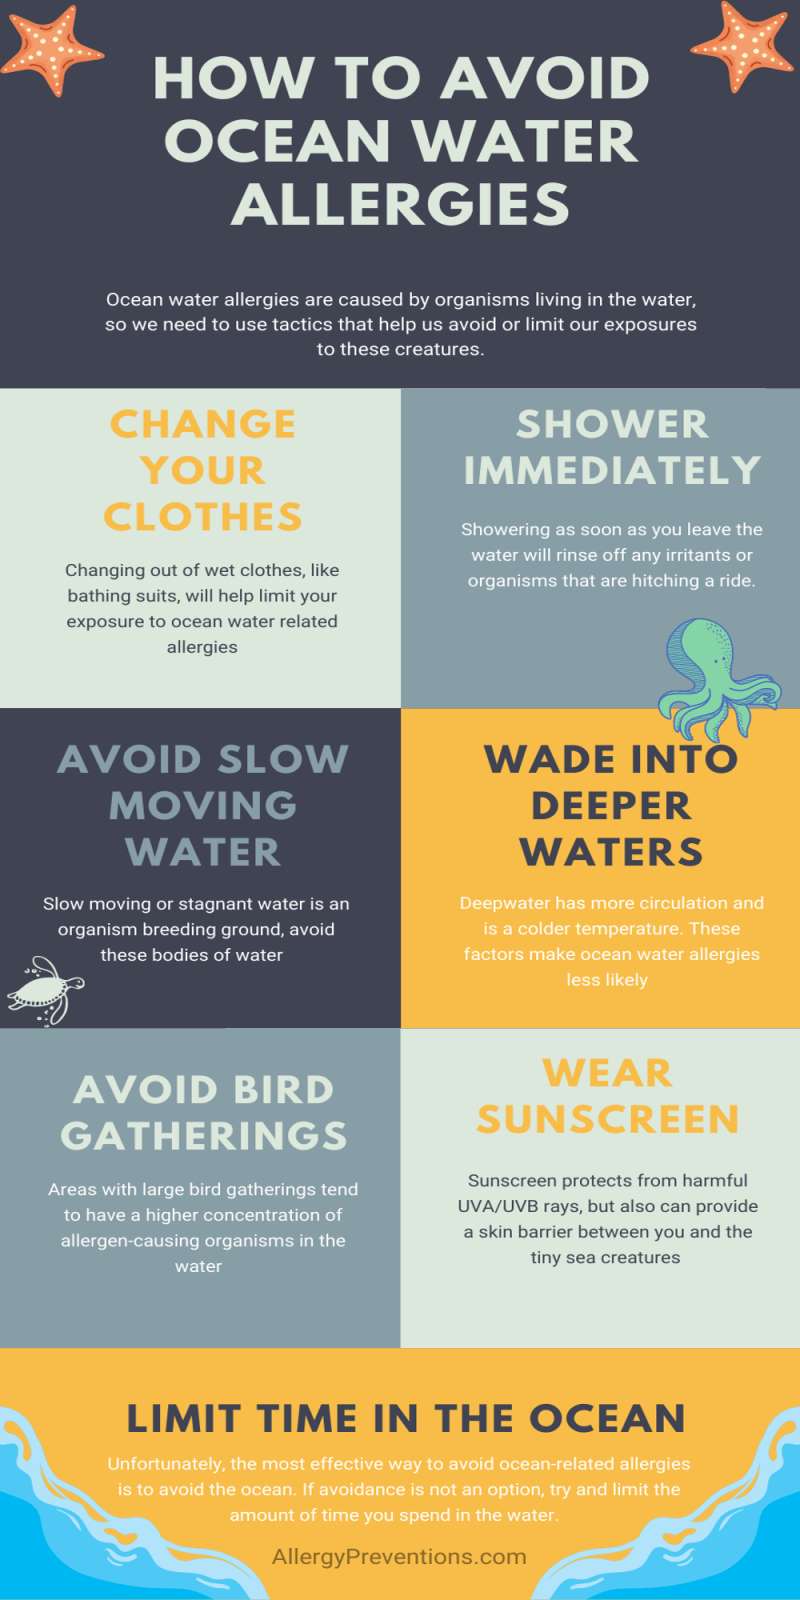 How to Avoid ocean water allergies infographic. 1. change your clothes 2. shower immediately 3. avoid slow moving water 4. wade into deeper waters 5. avoid bird gatherings 6. wear sunscreen 7. limit time in the ocean